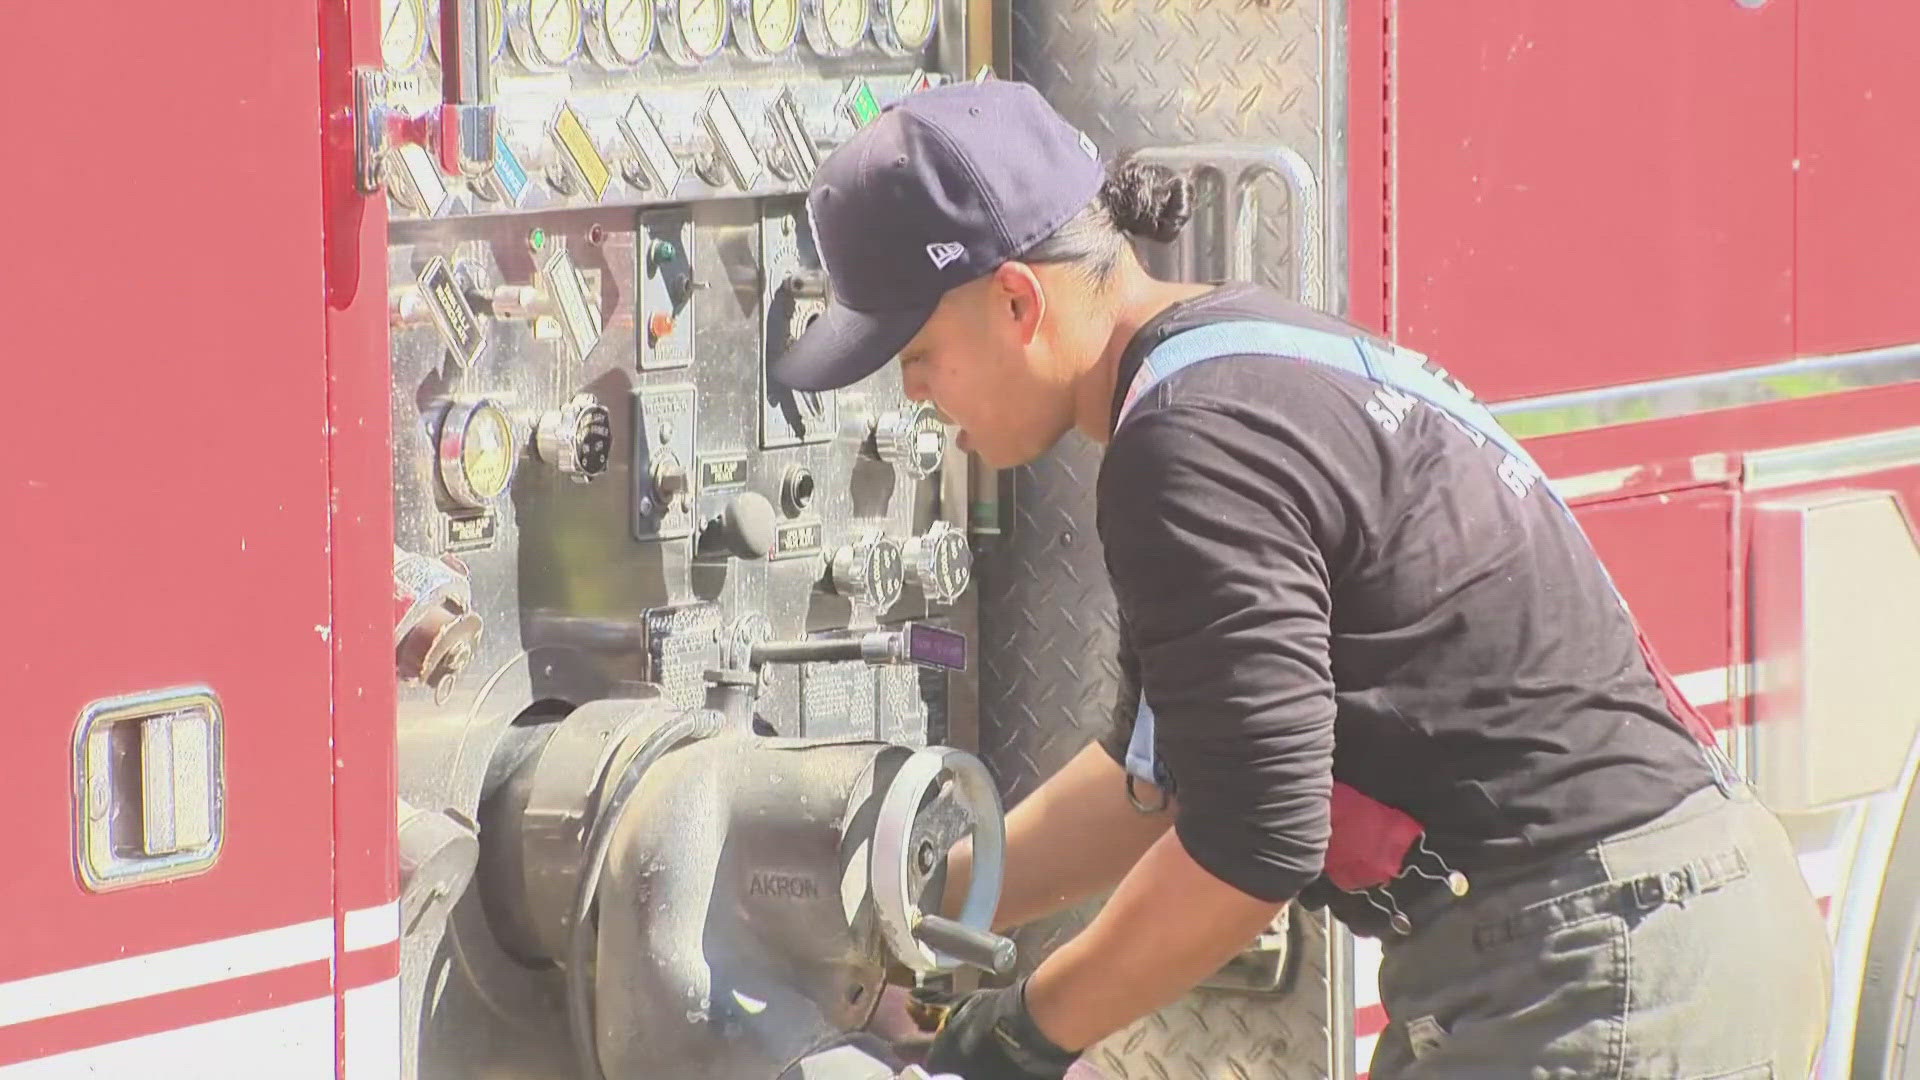 Jacksonville has more than 220 woman firefighters gearing up daily. When analyzing the numbers, the amount of women staffed in Duval Co. double the nation's average.